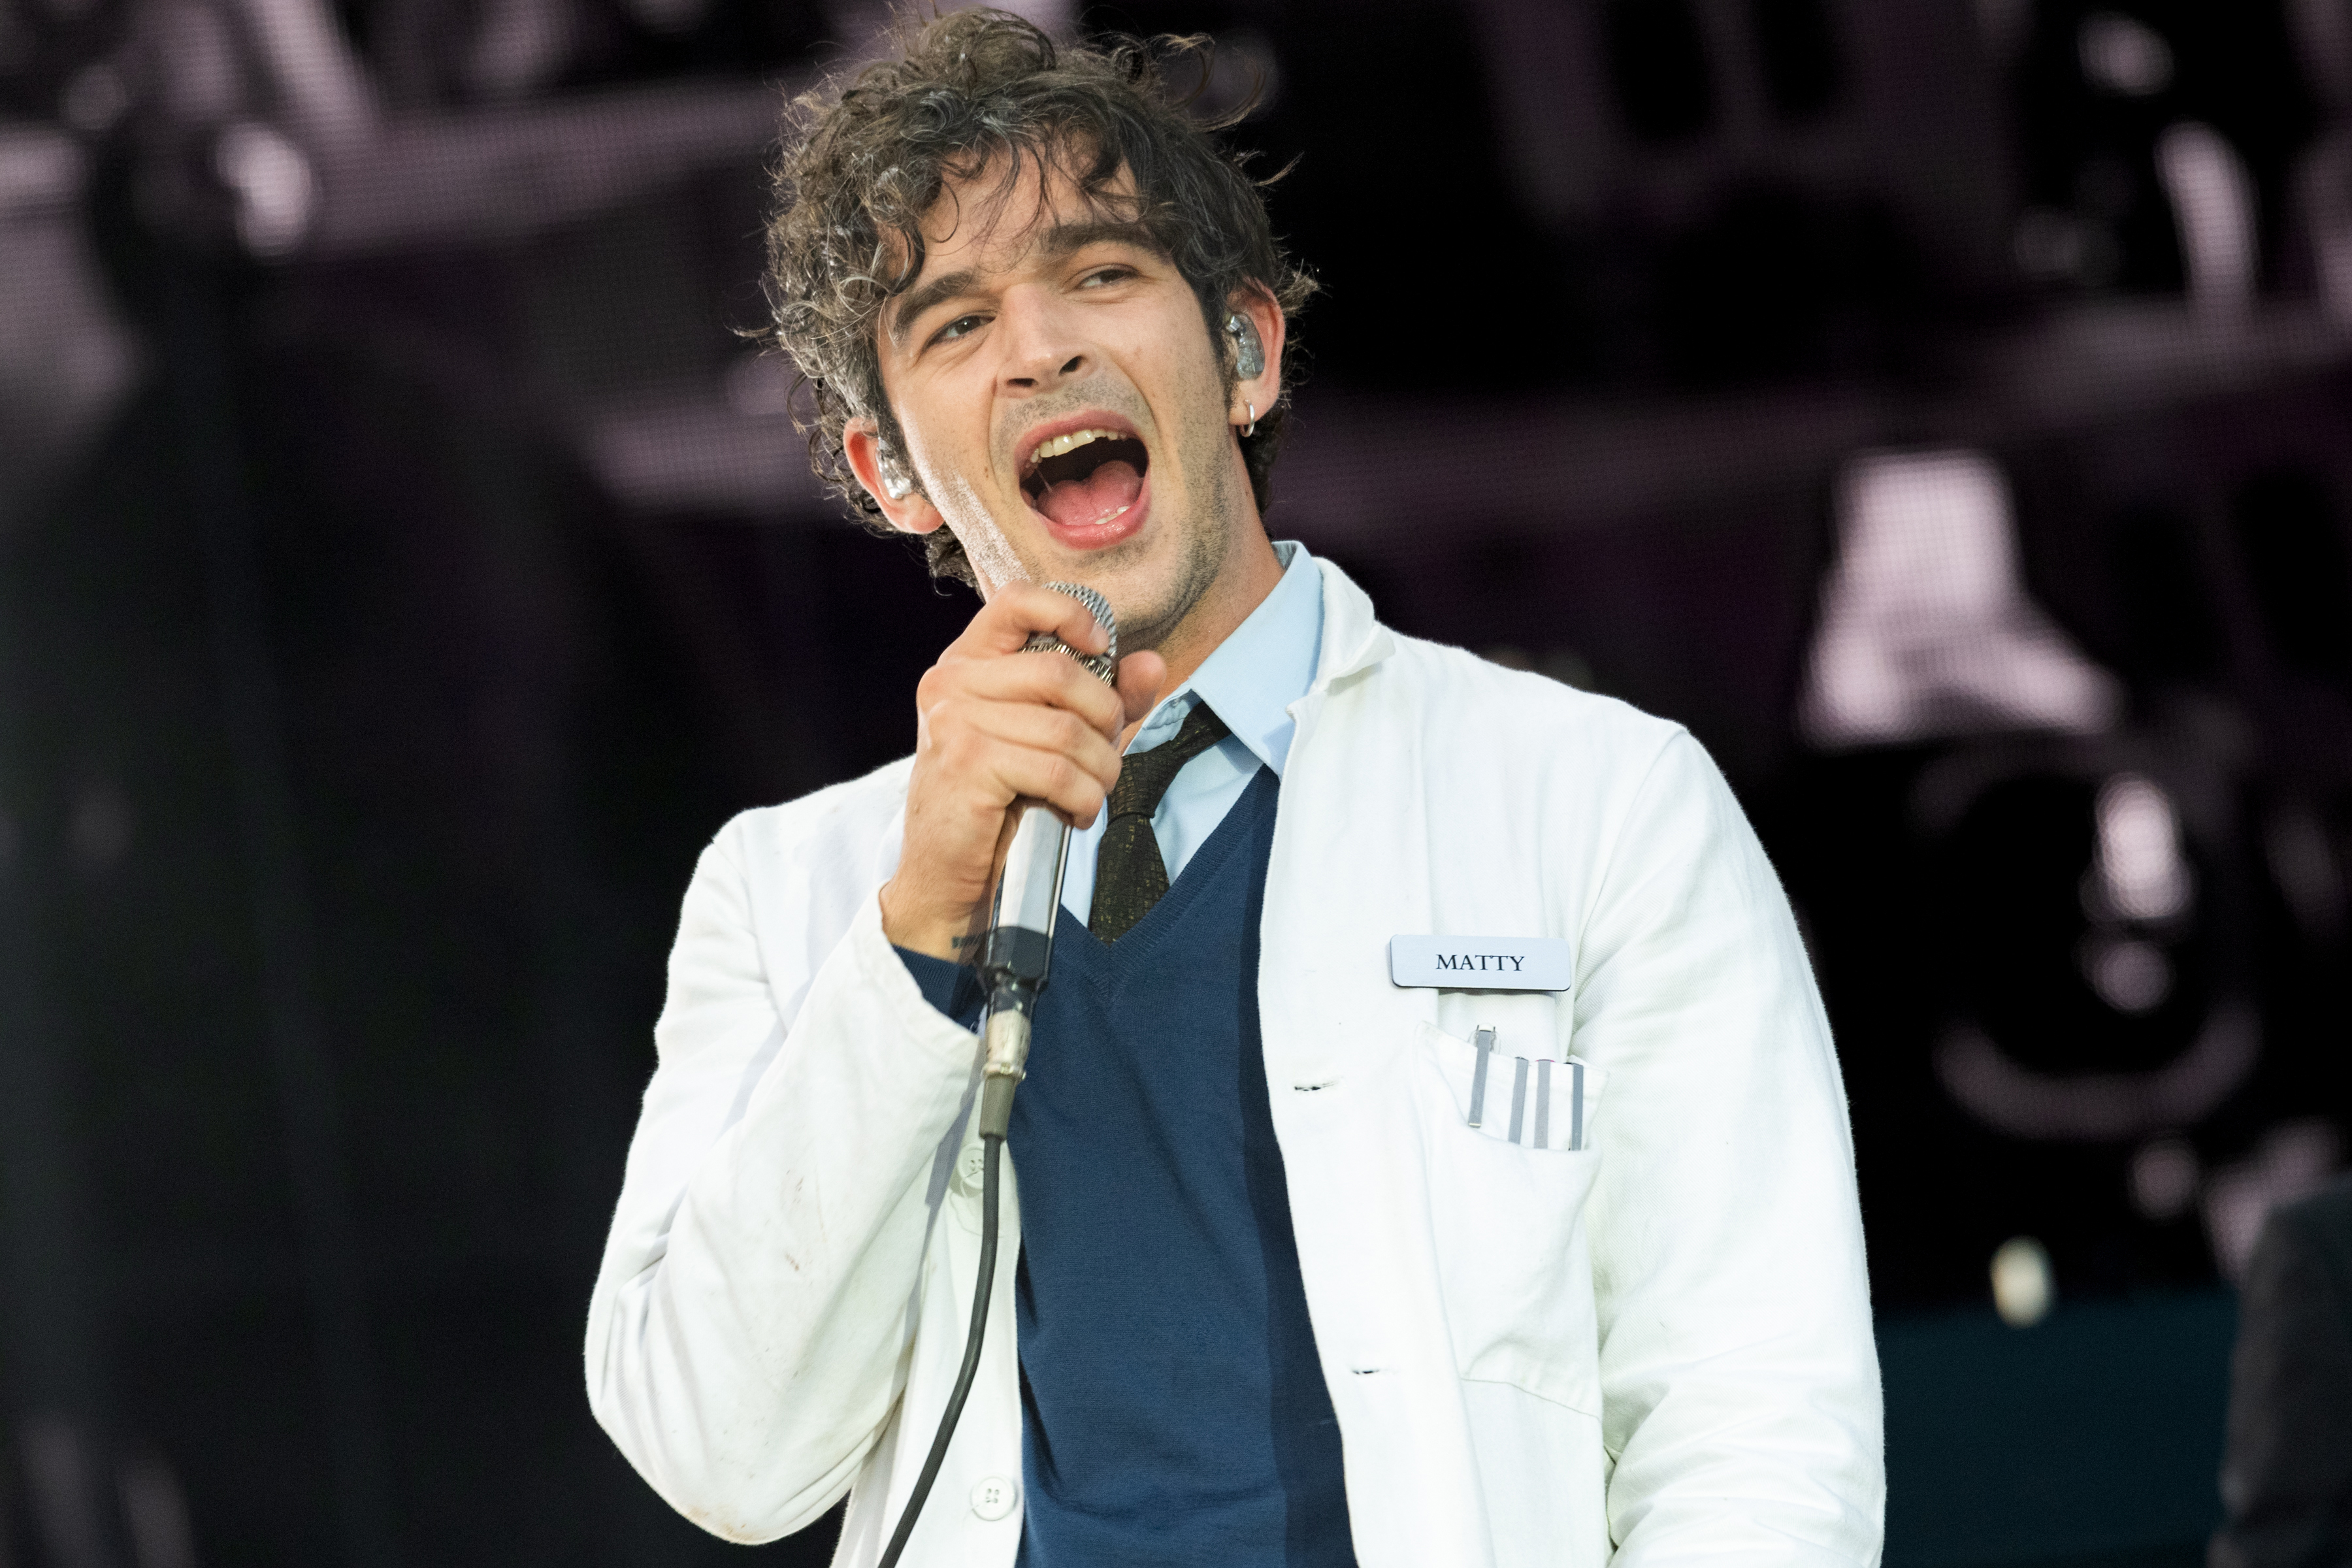 Matty Healy of The 1975 performing on stage, wearing a white lab coat with &quot;Matty&quot; name tag